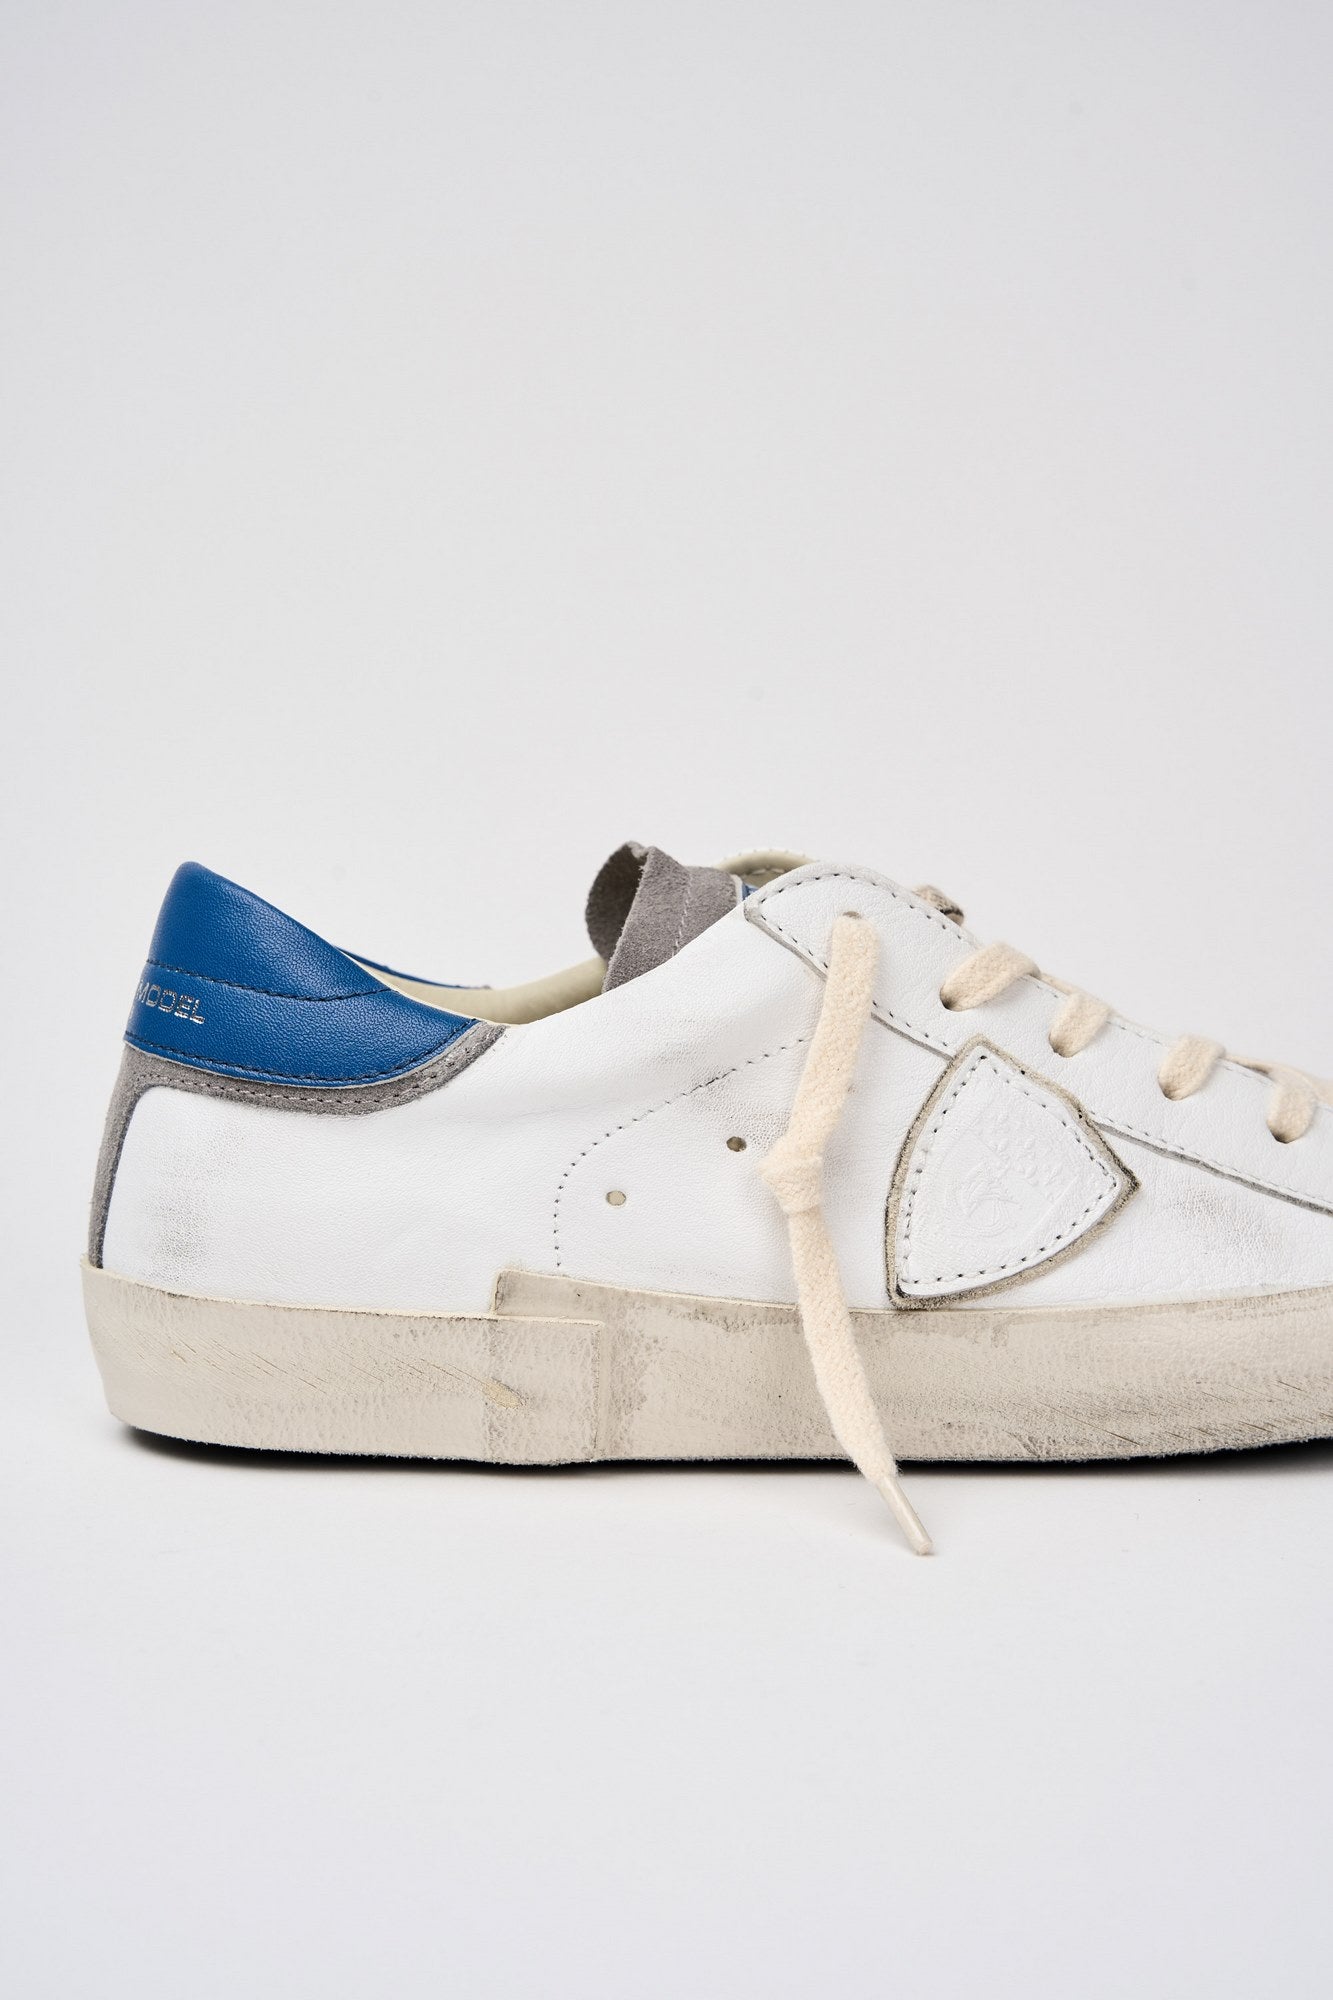 Philippe Model Sneaker Prsx Leather/Suede White/Blue-4